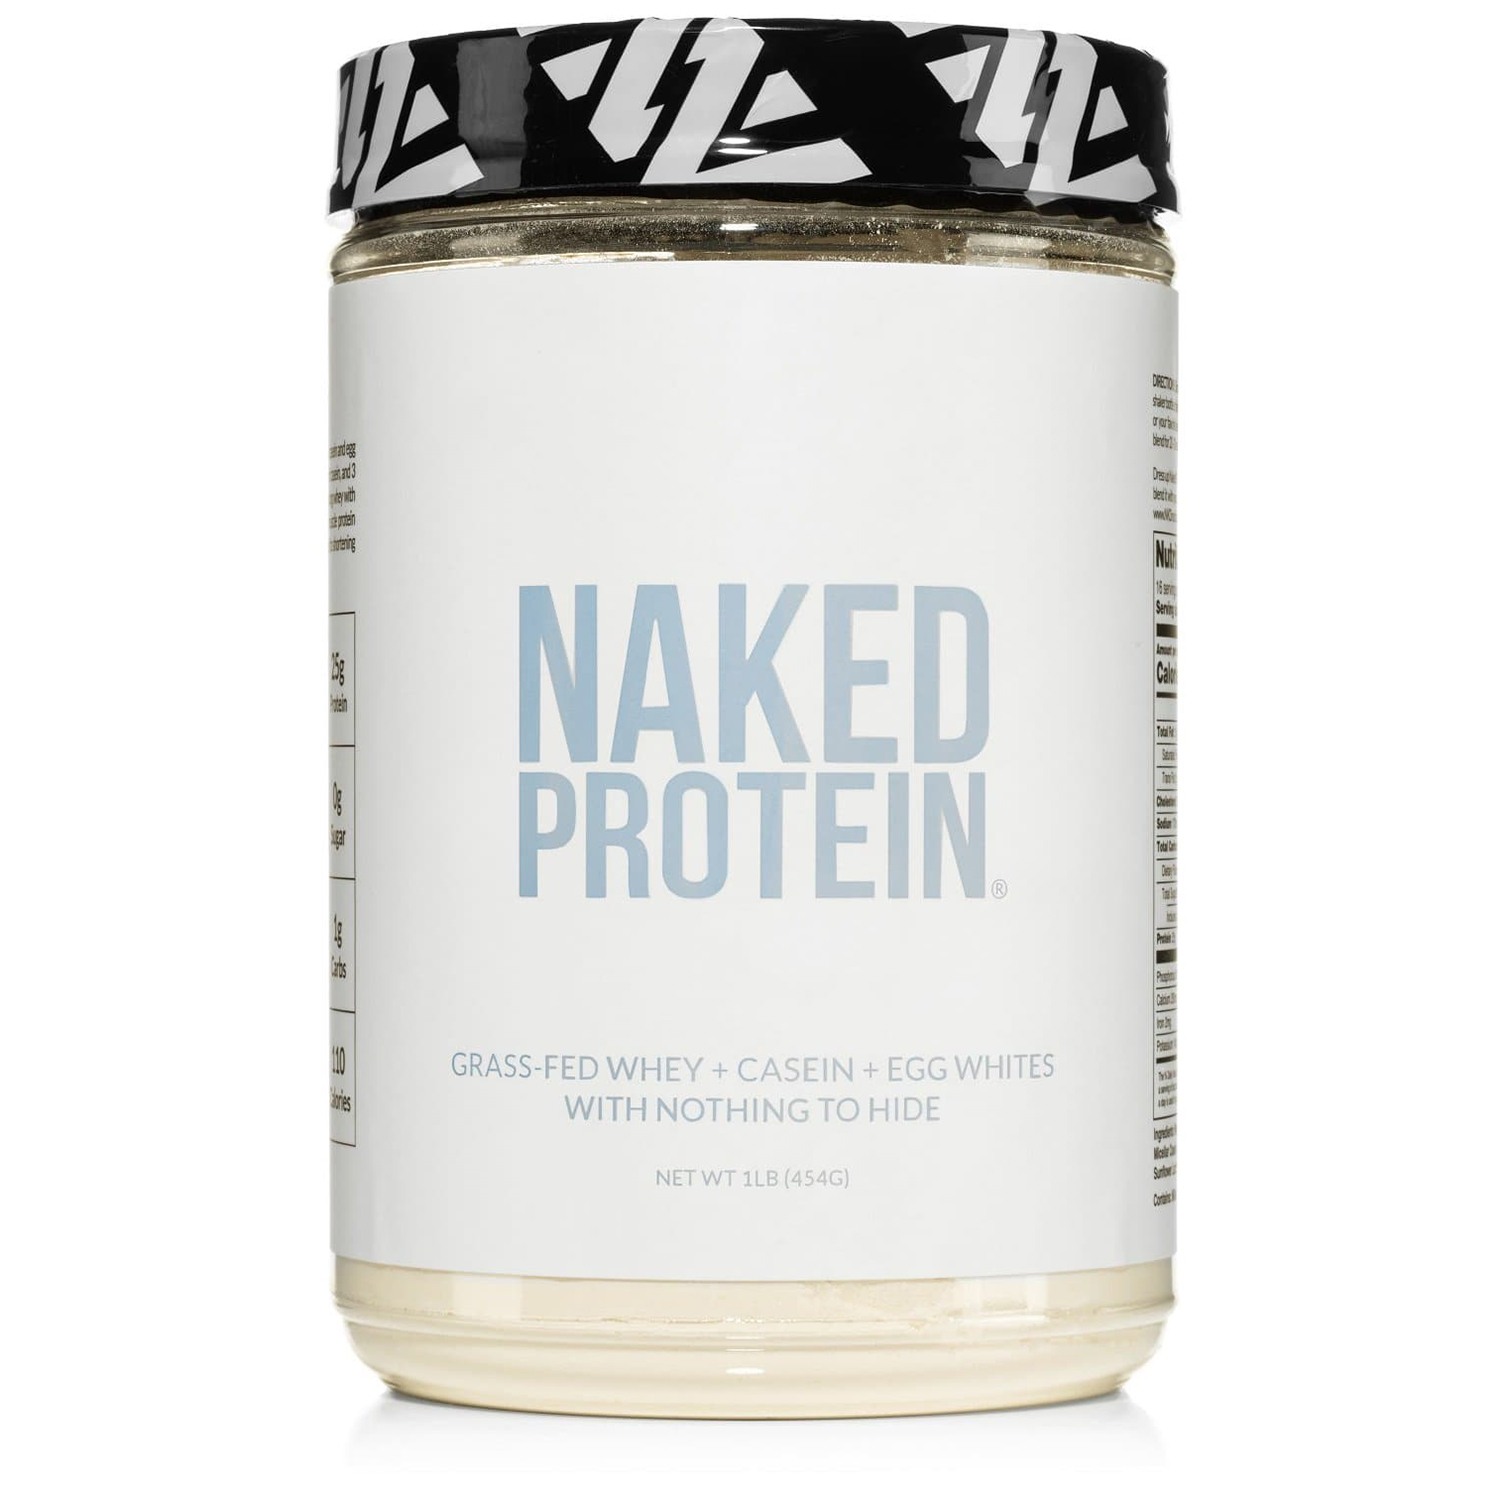 Naked Protein Powder Blend - Egg, Whey and Casein Protein Blend - image 1 of 7